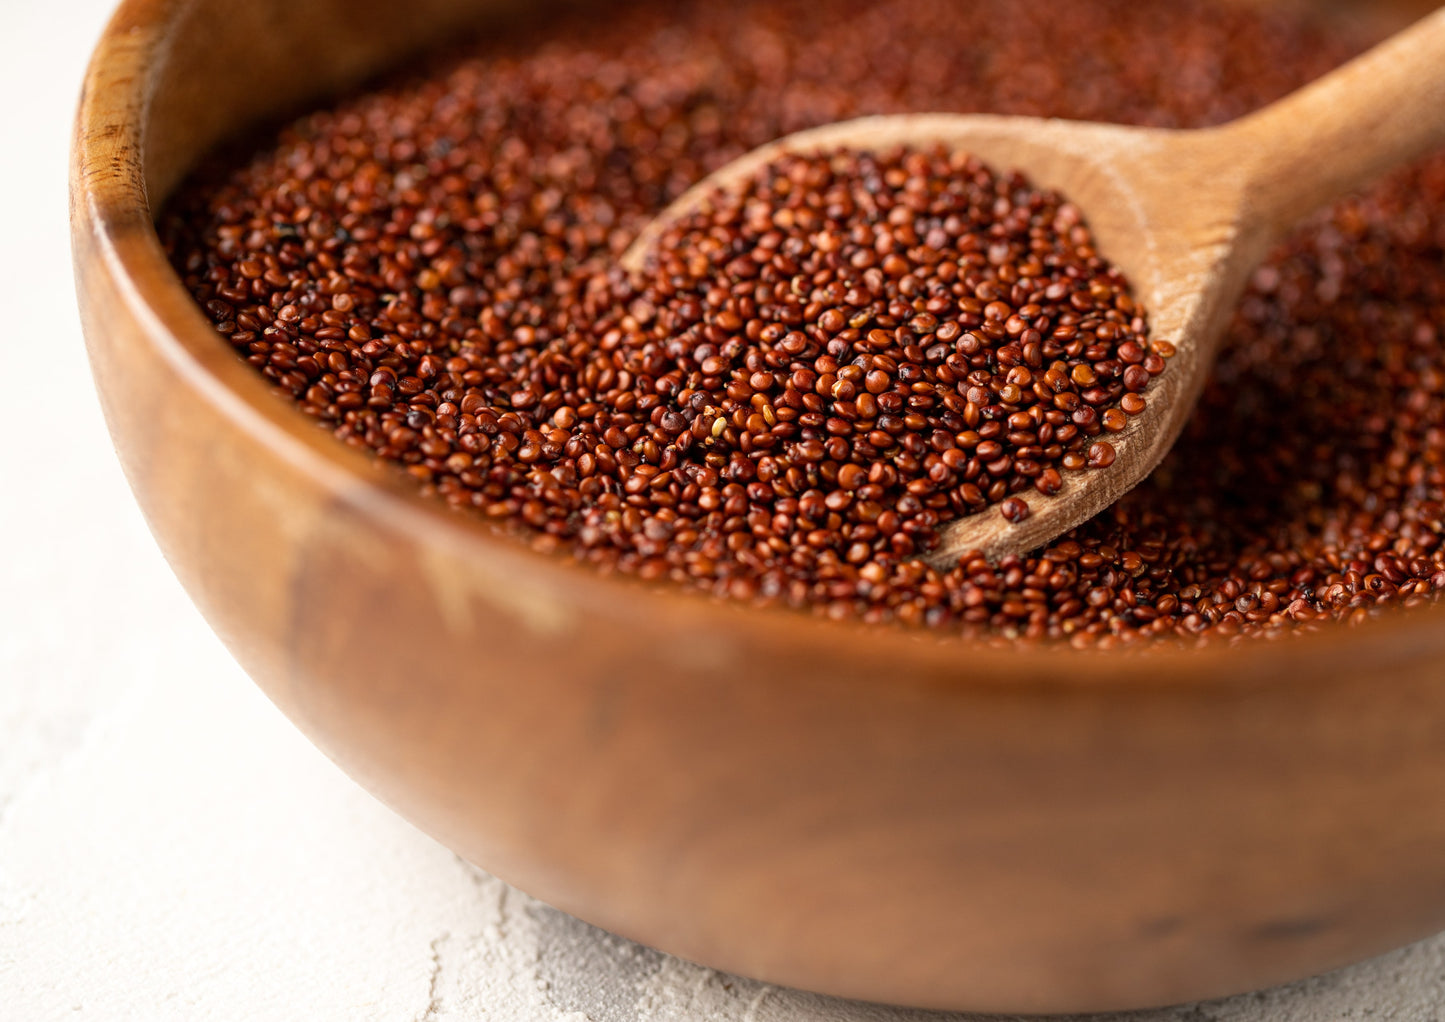 Red Quinoa - Ancient Whole Grain Seeds, Raw, Sproutable, Kosher, Vegan, Sirtfood, Bulk. Rich in Essential Amino Acids and Minerals. Quick-Cooking. Perfect for Salads